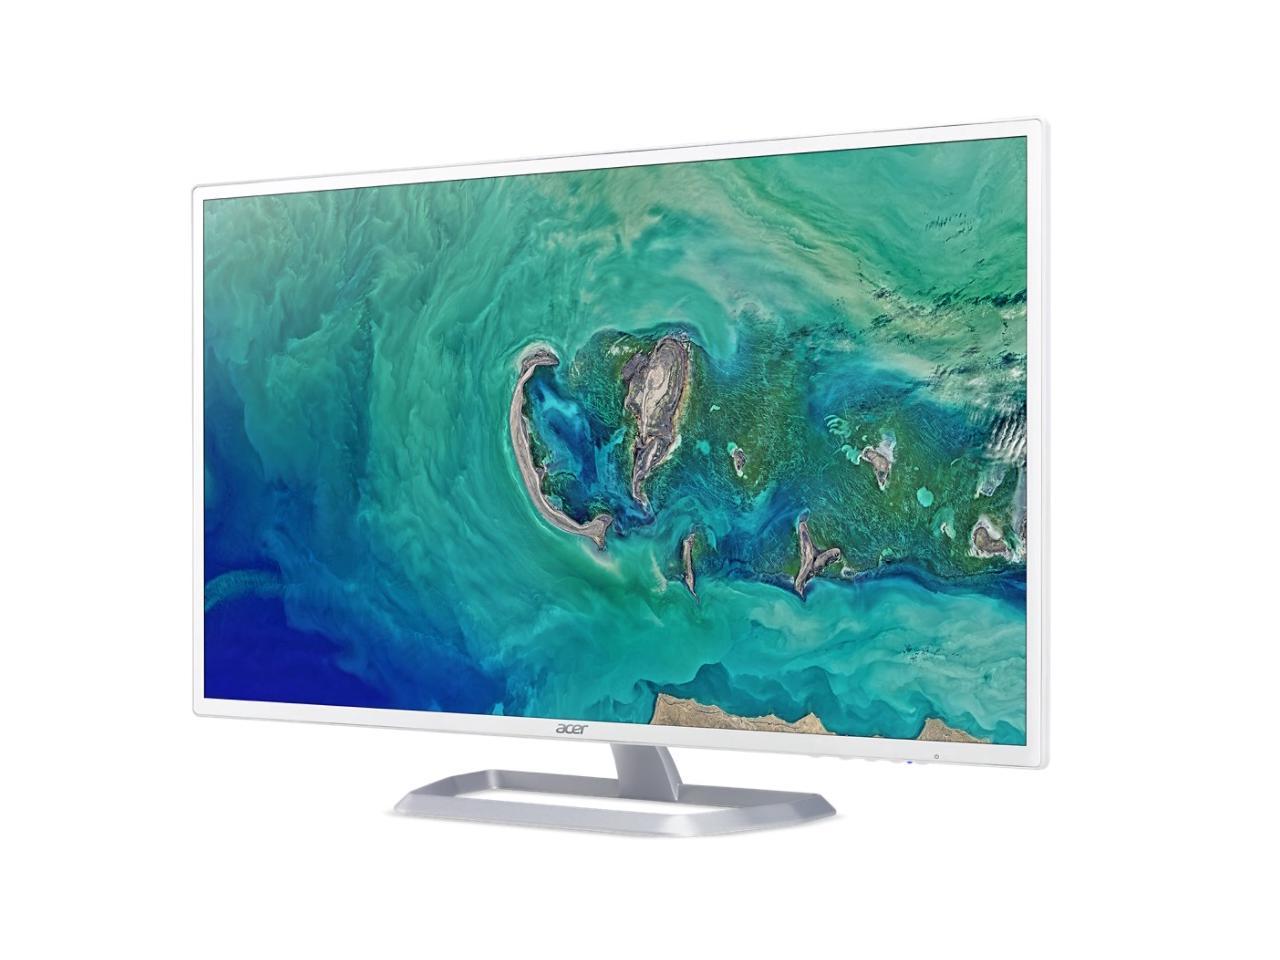 Acer Office Professional EB321HQ Awi 32" IPS 1920x1080 Low Blue Light and Flicker-Less VESA wall Mounting Monitor, VGA, HDMI - image 3 of 6